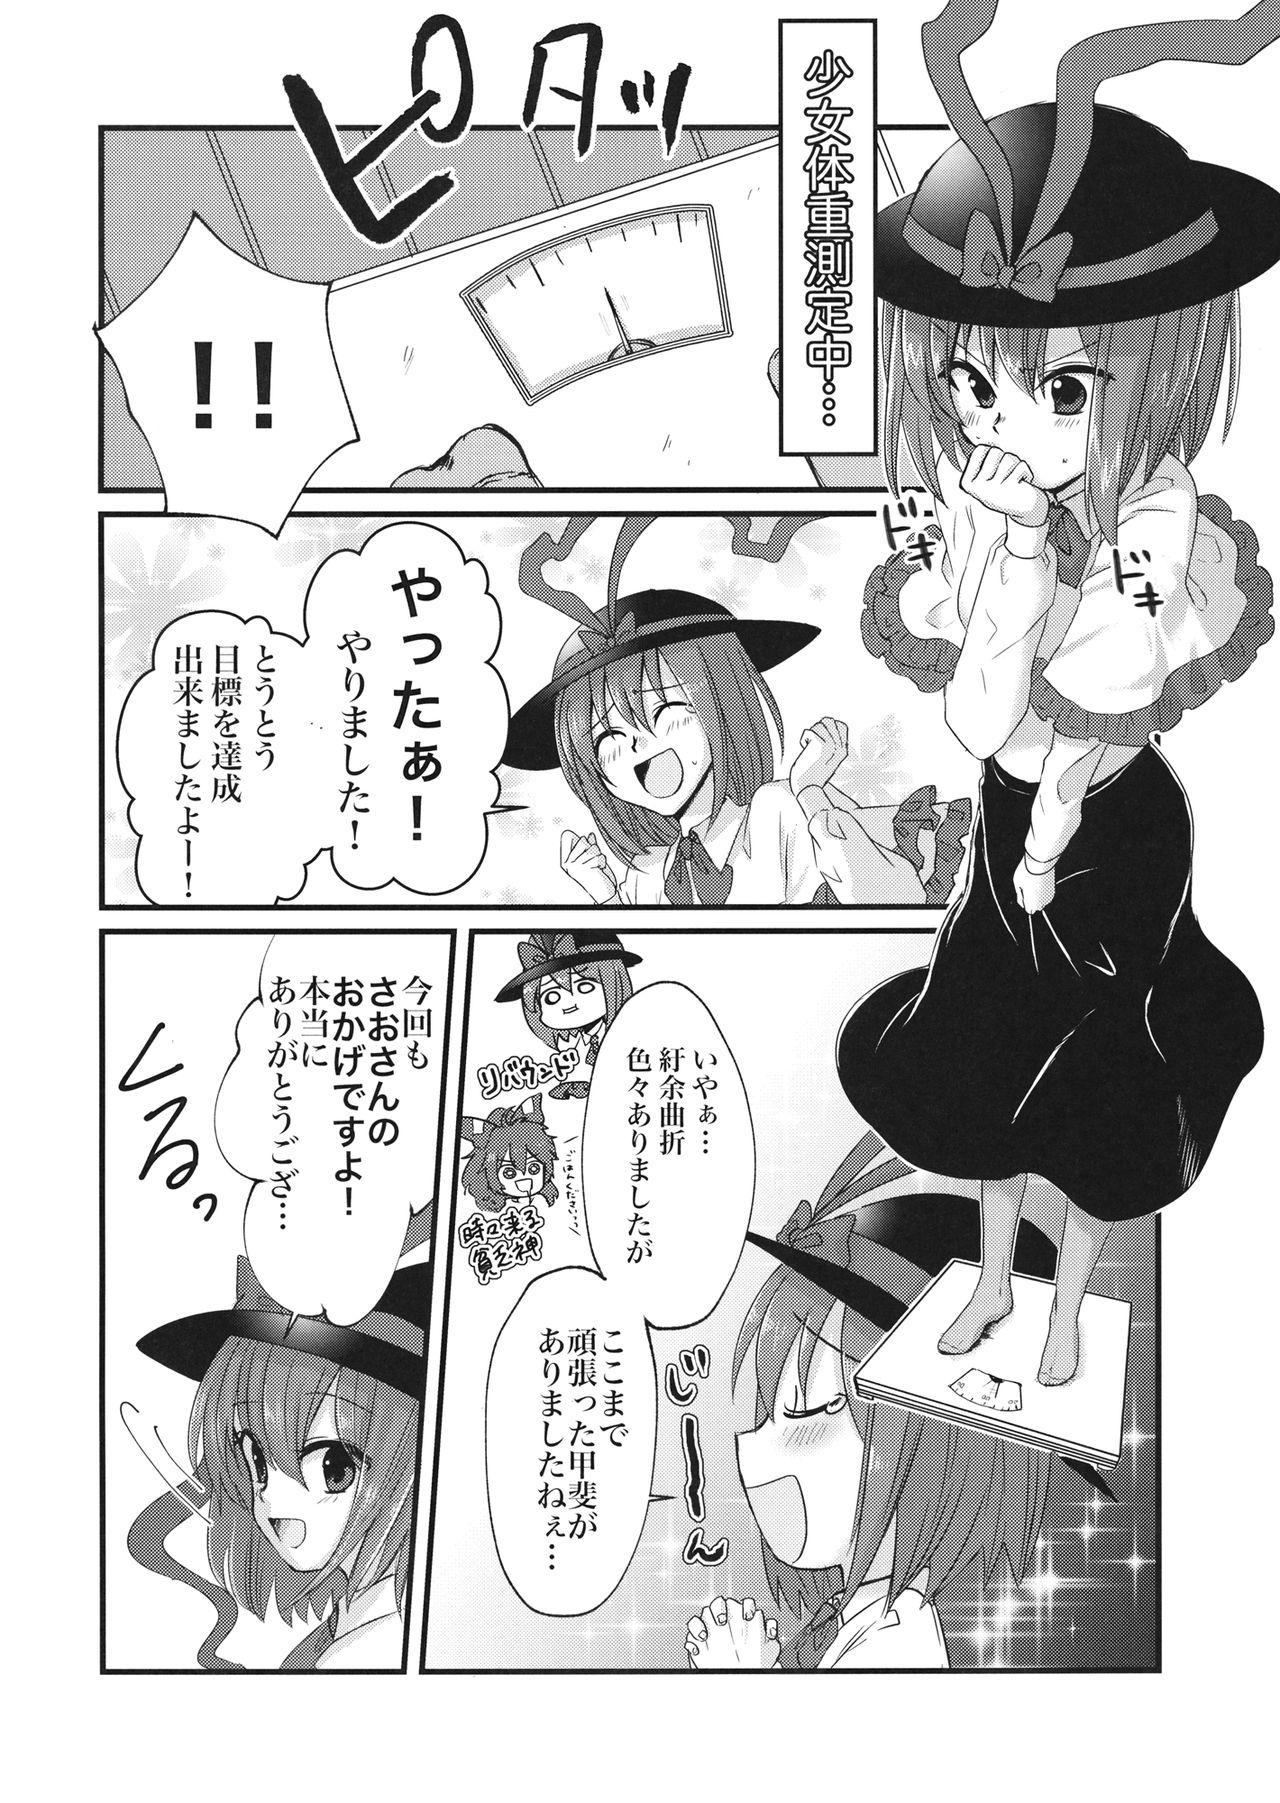 Rico 衣玖さんと一緒に色々頑張る本 - Touhou project Mexican - Page 3